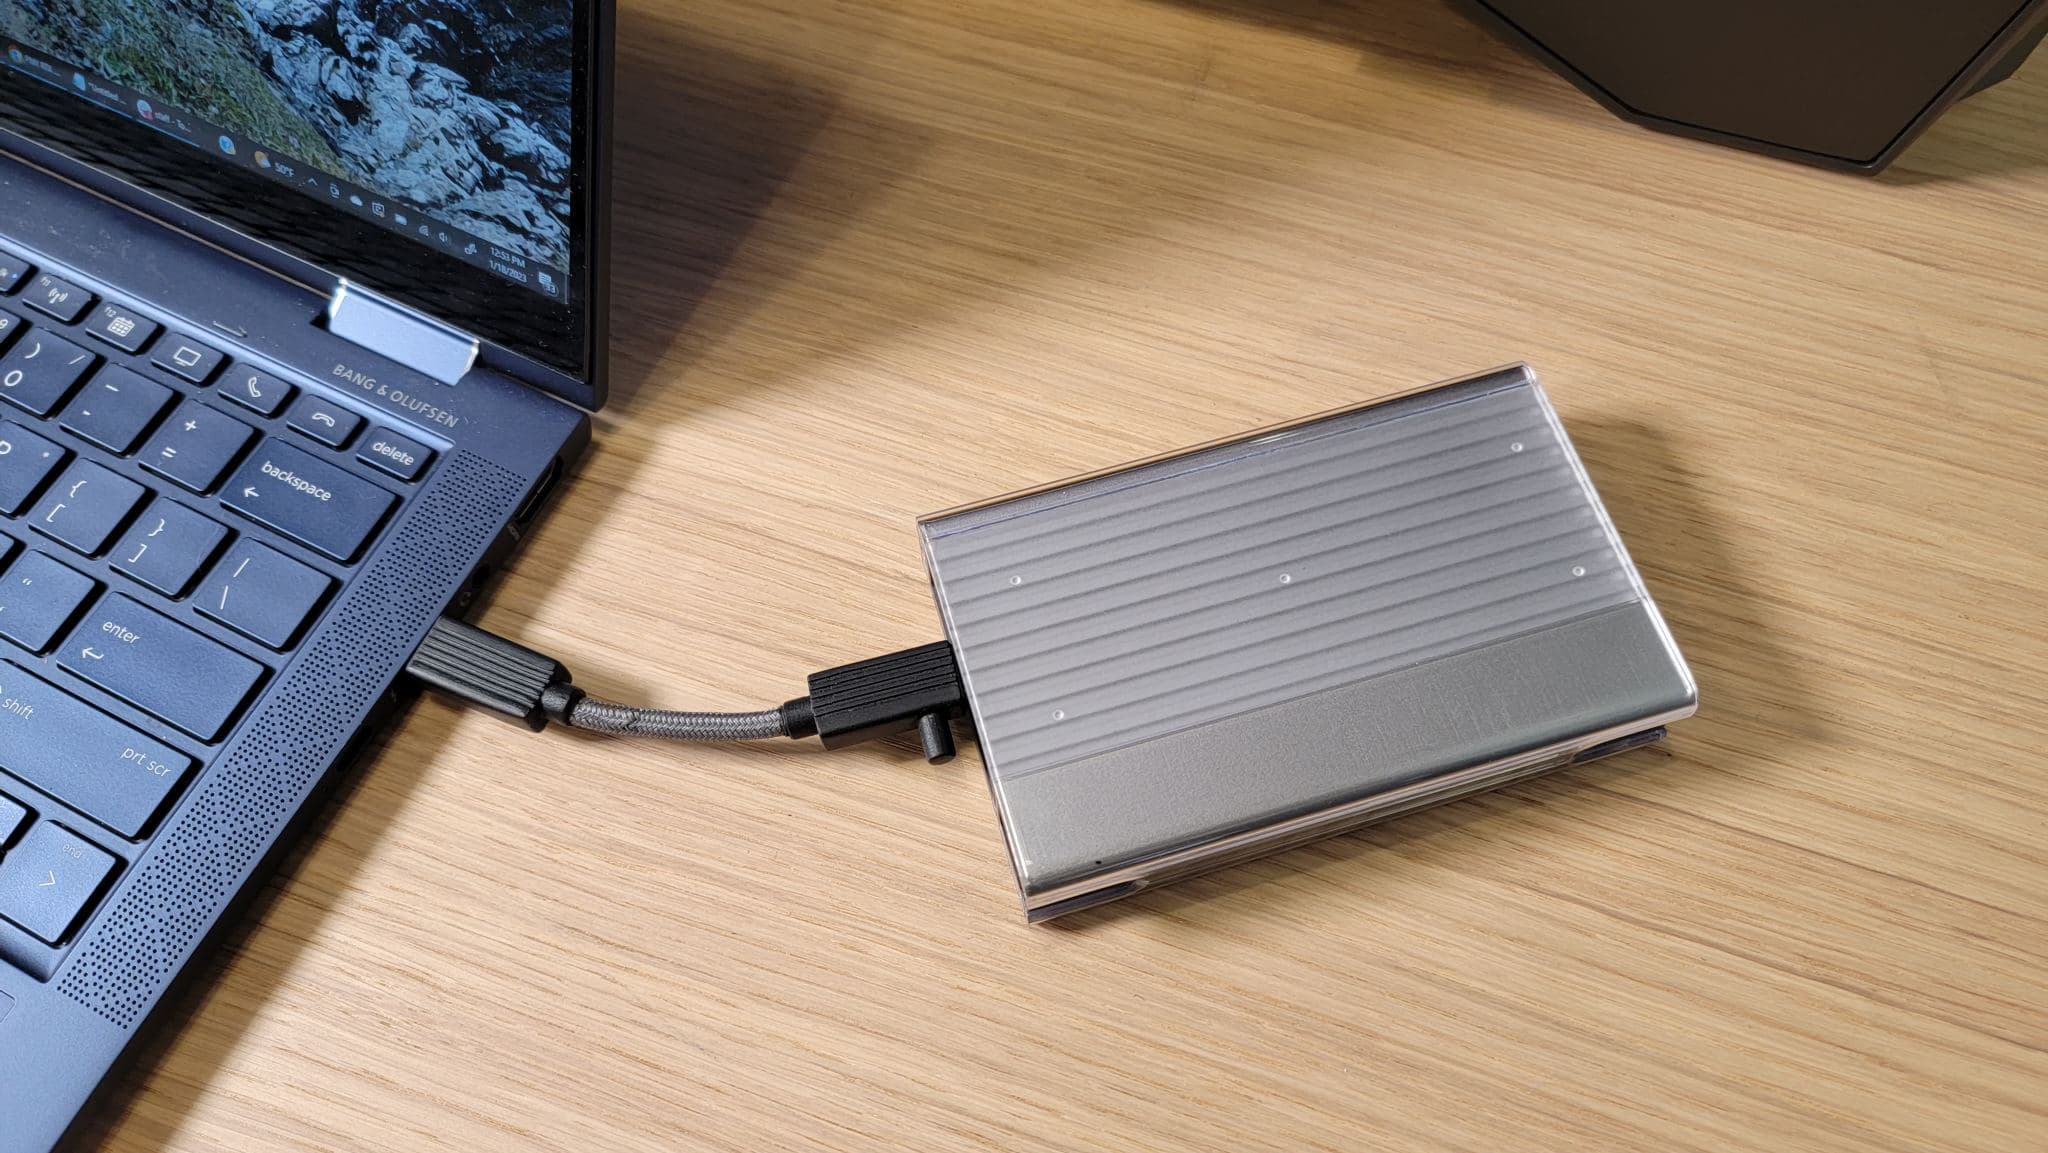 Introducing ZikeDrive: the ultimate USB4 SSD enclosure for creatives and professionals